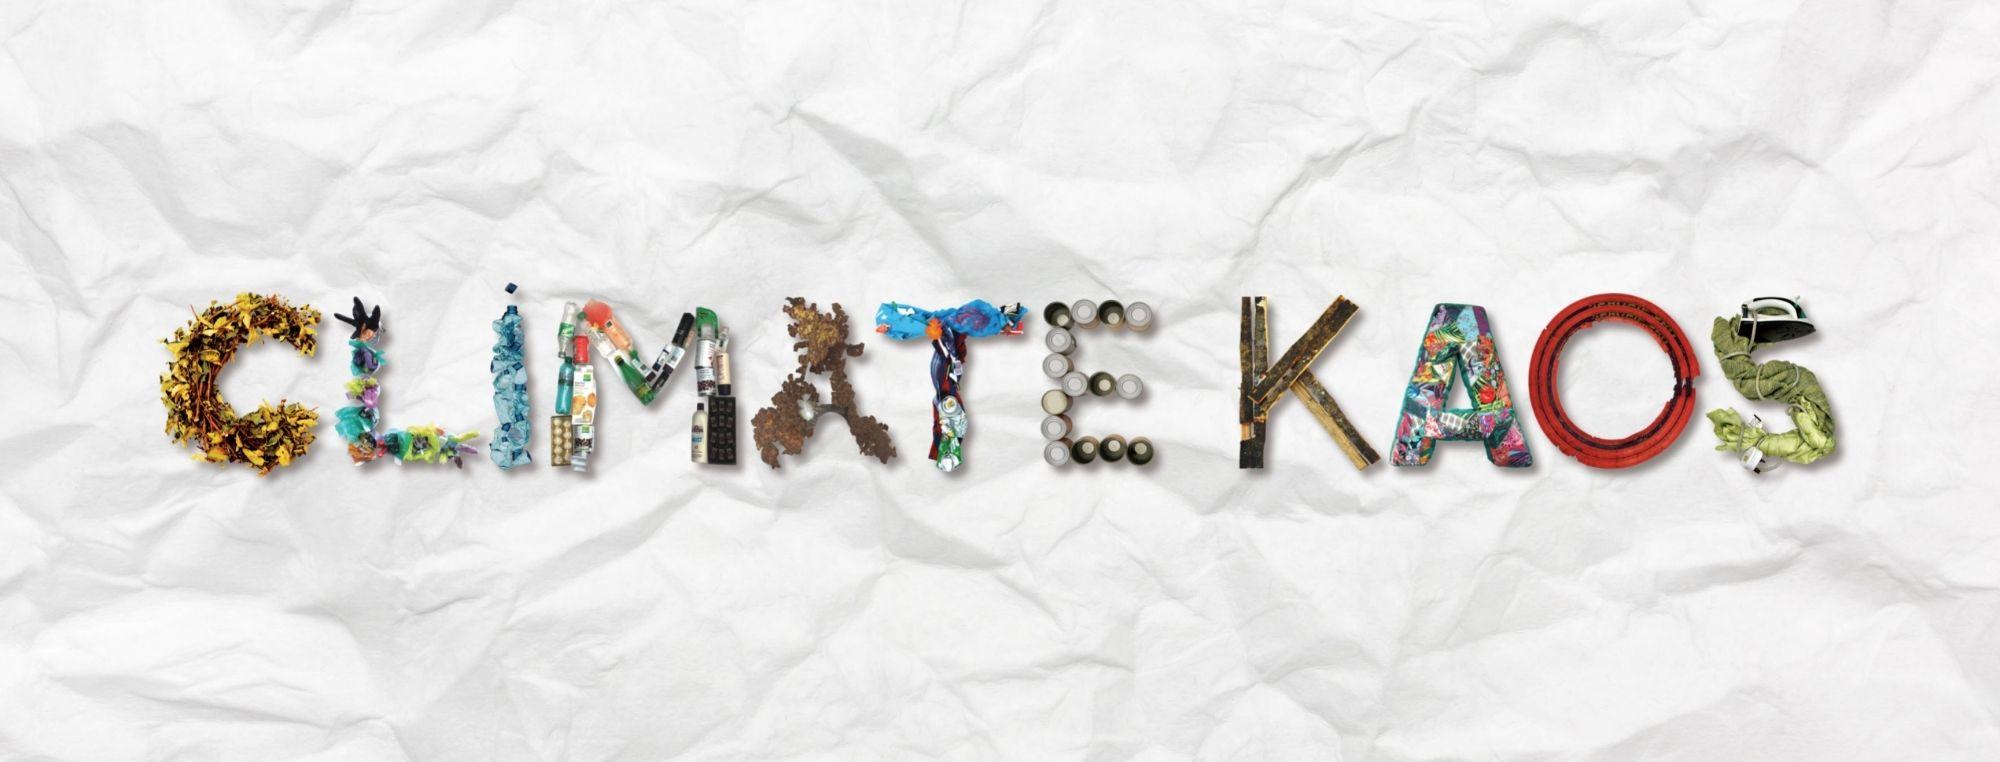 &#039;Climate KAOS&#039; spelt out with recycled waste items such as fabrics, plastic bottles etc.